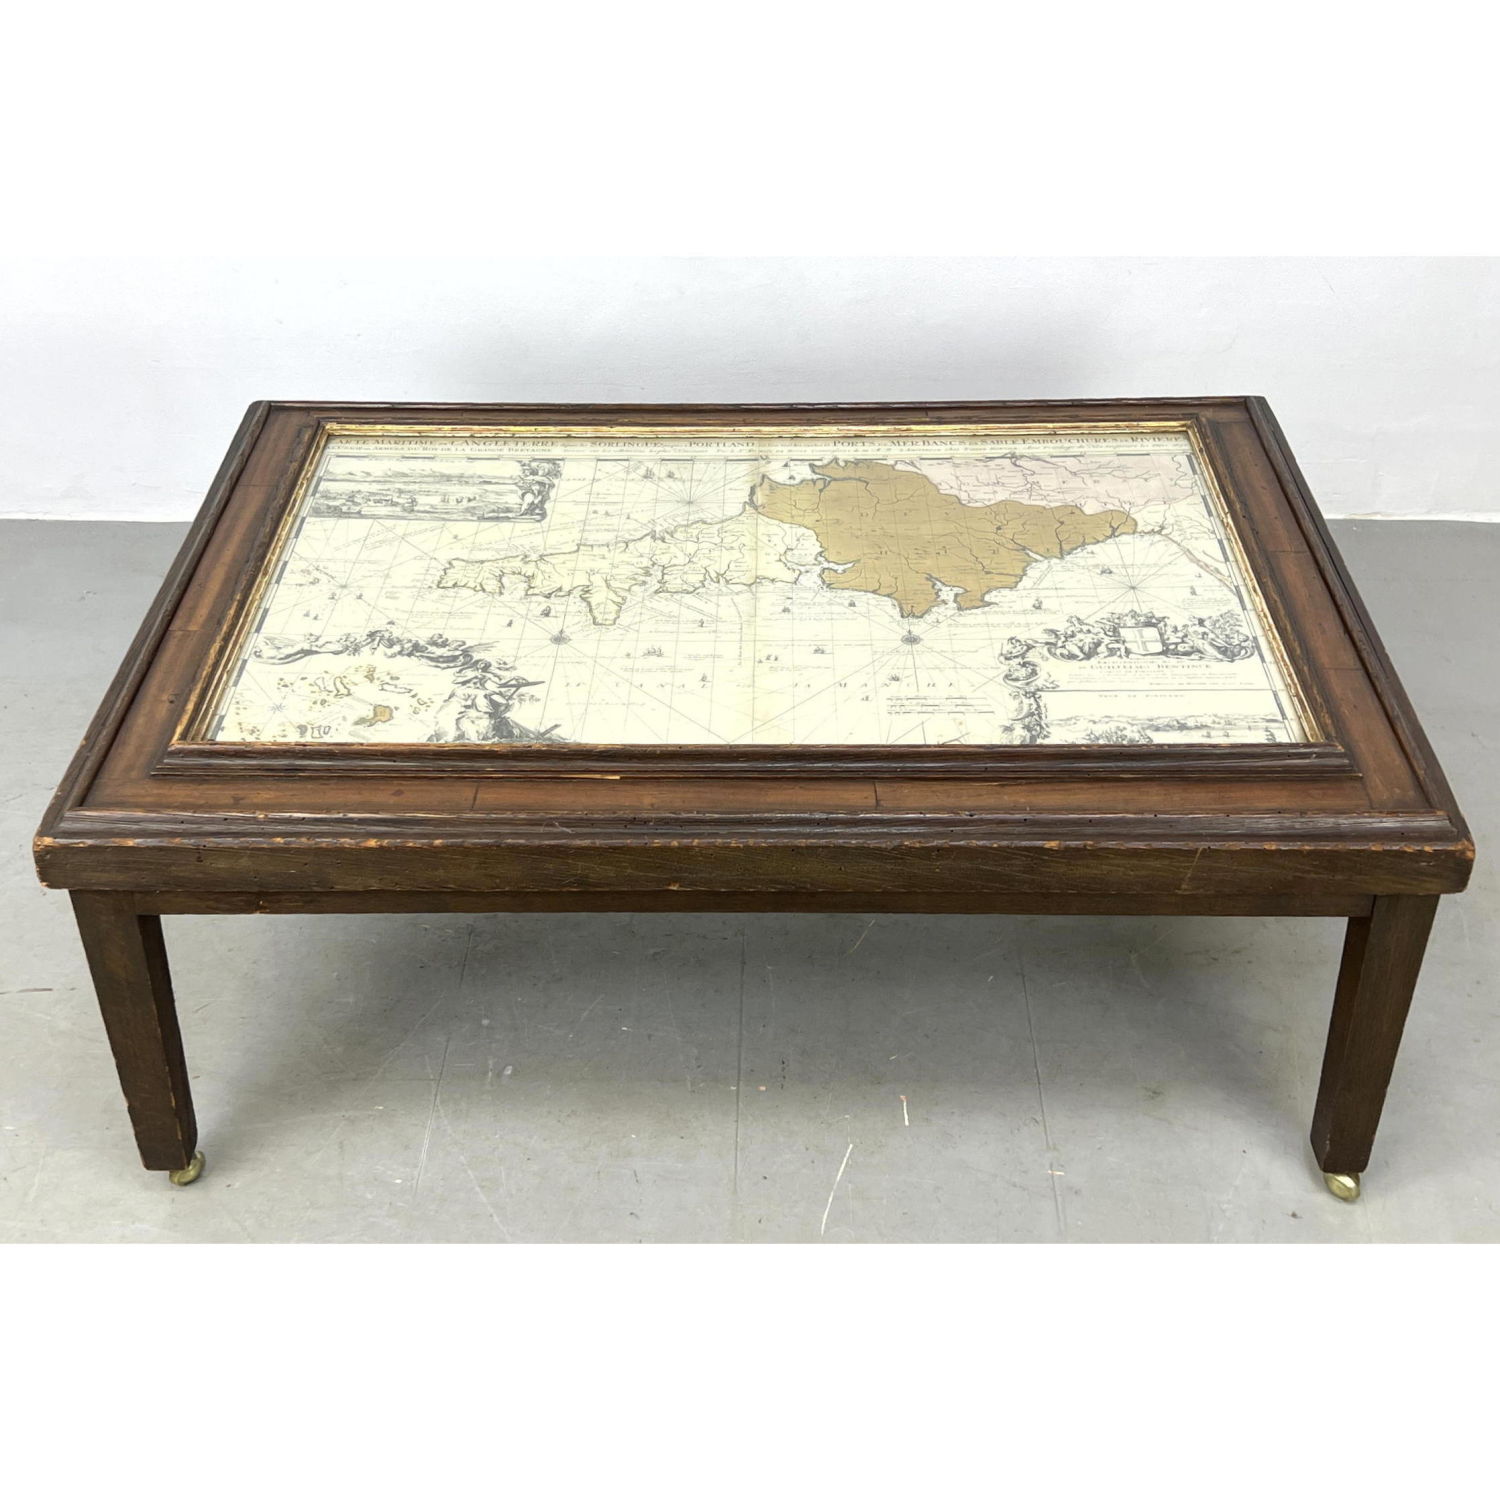 Framed Vintage Map Coffee Table  2b87fc